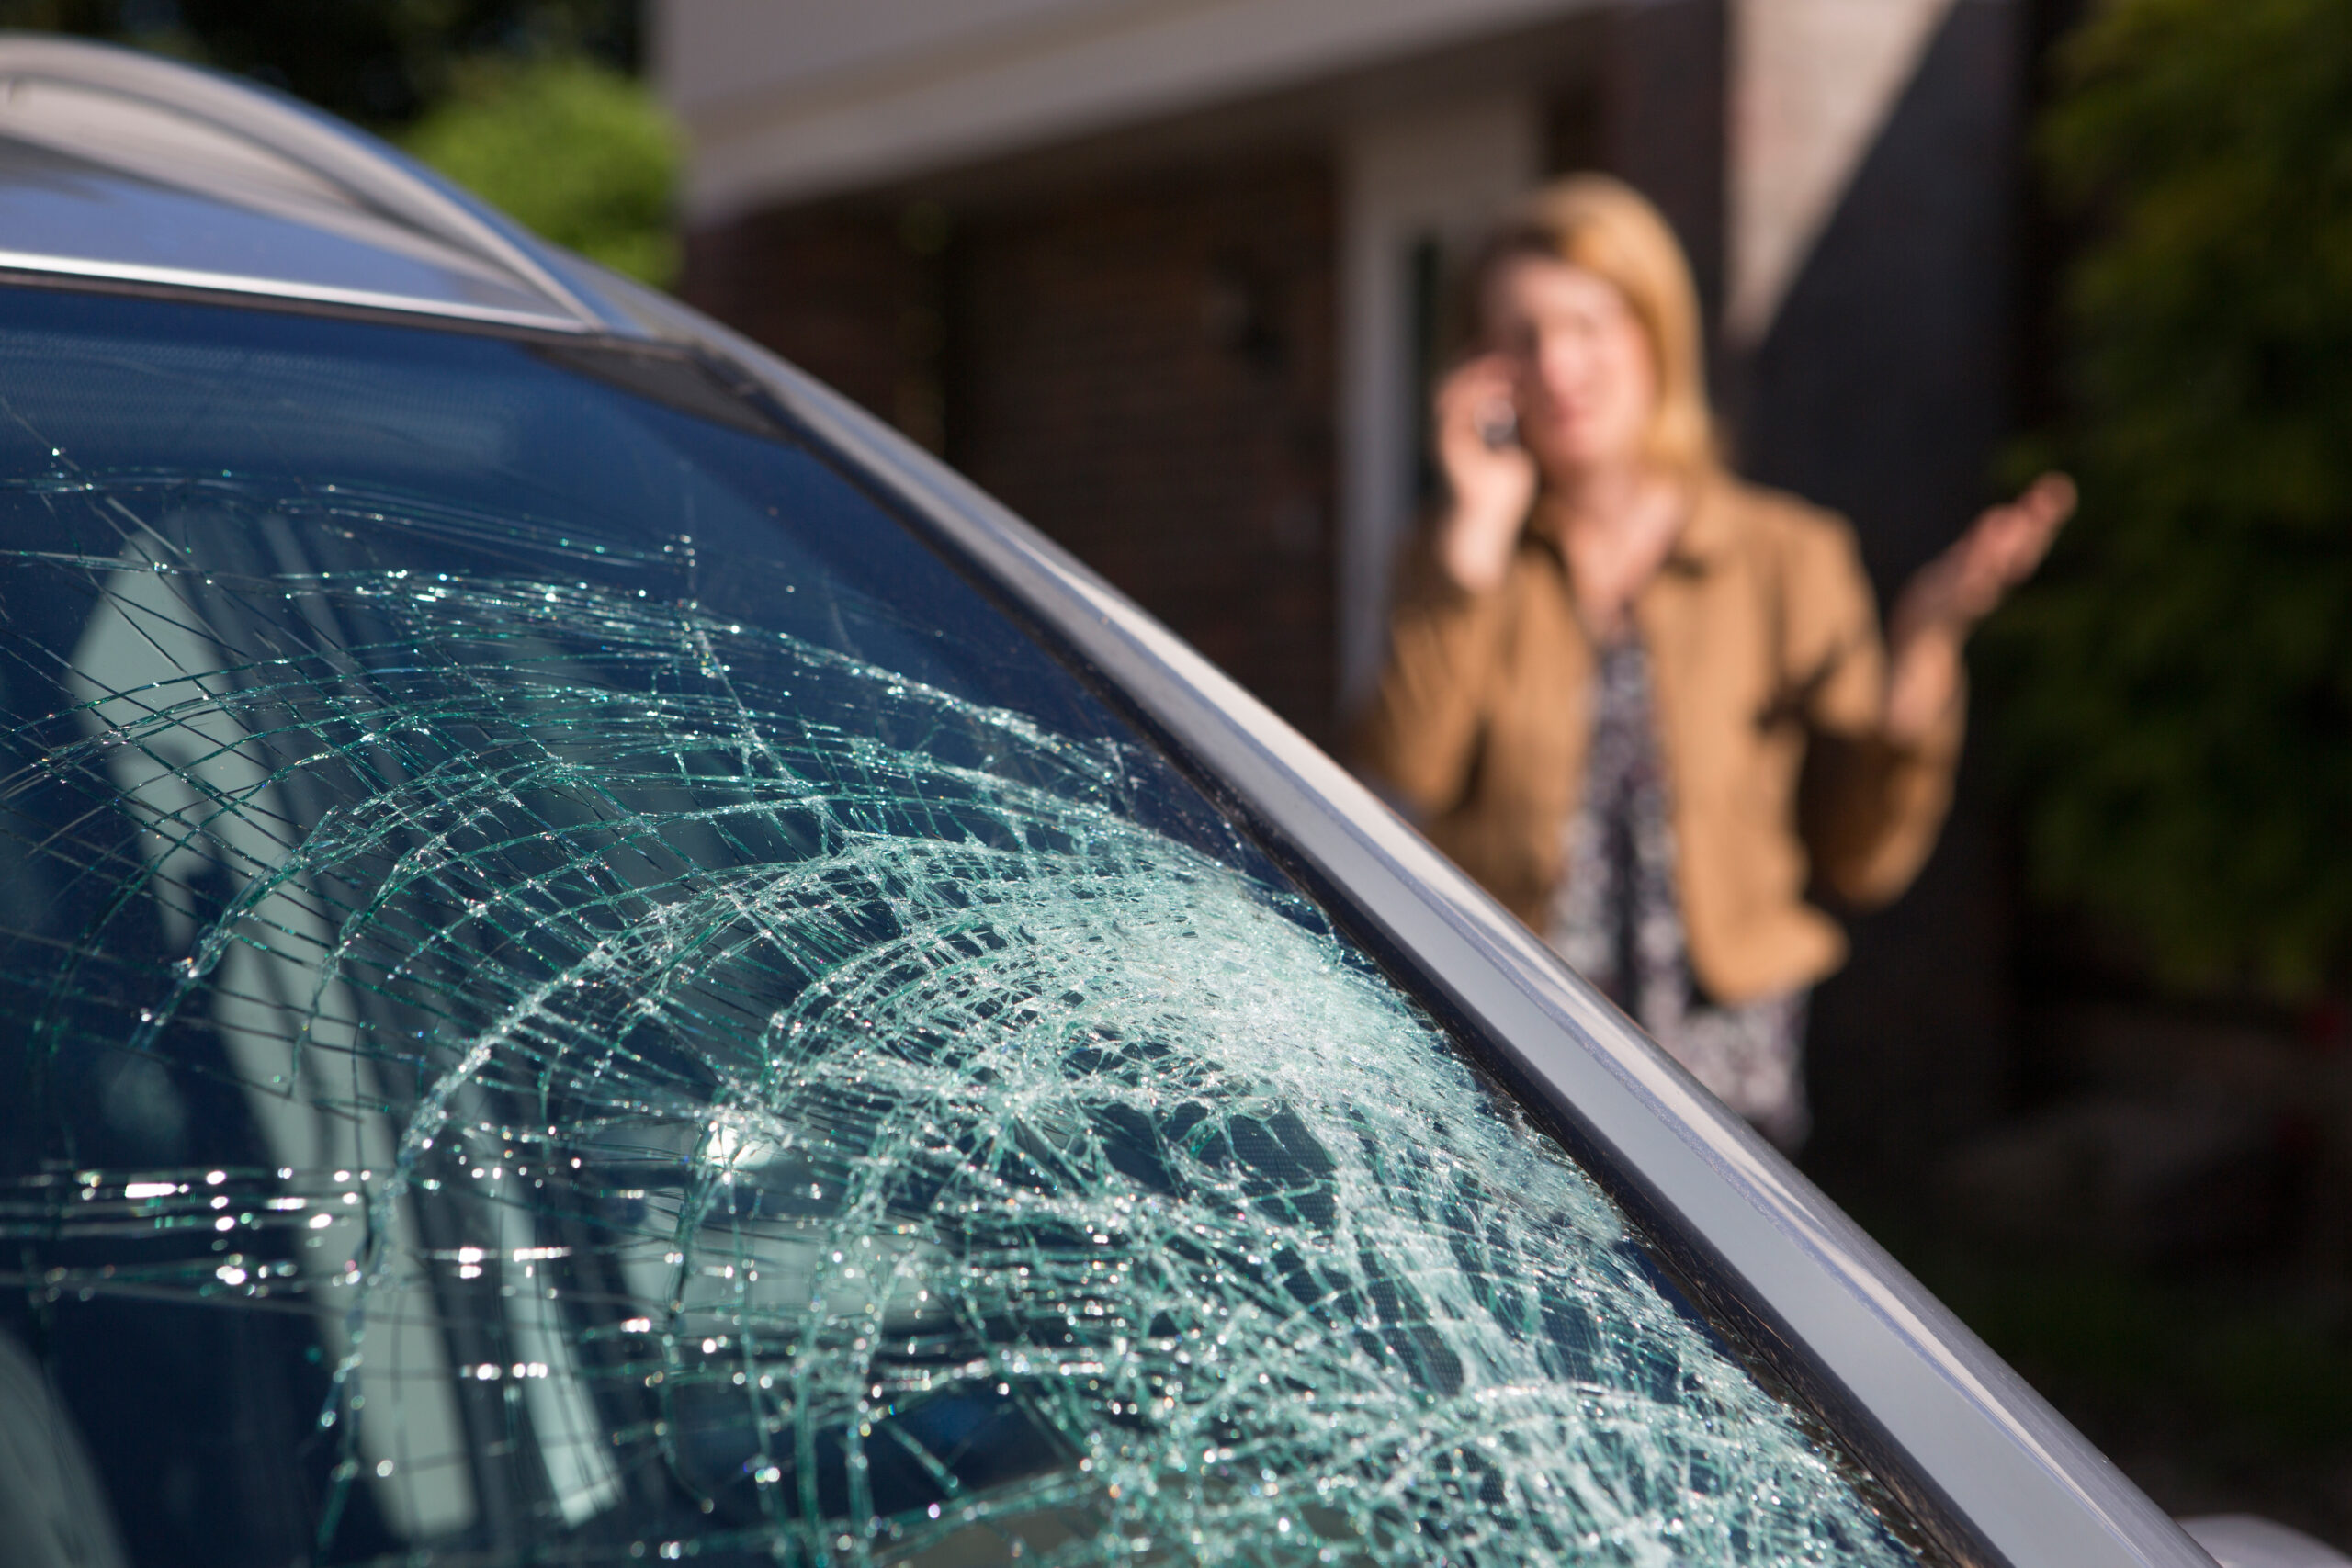 Windshield Repair vs Replacement: Which Is The Better Option?